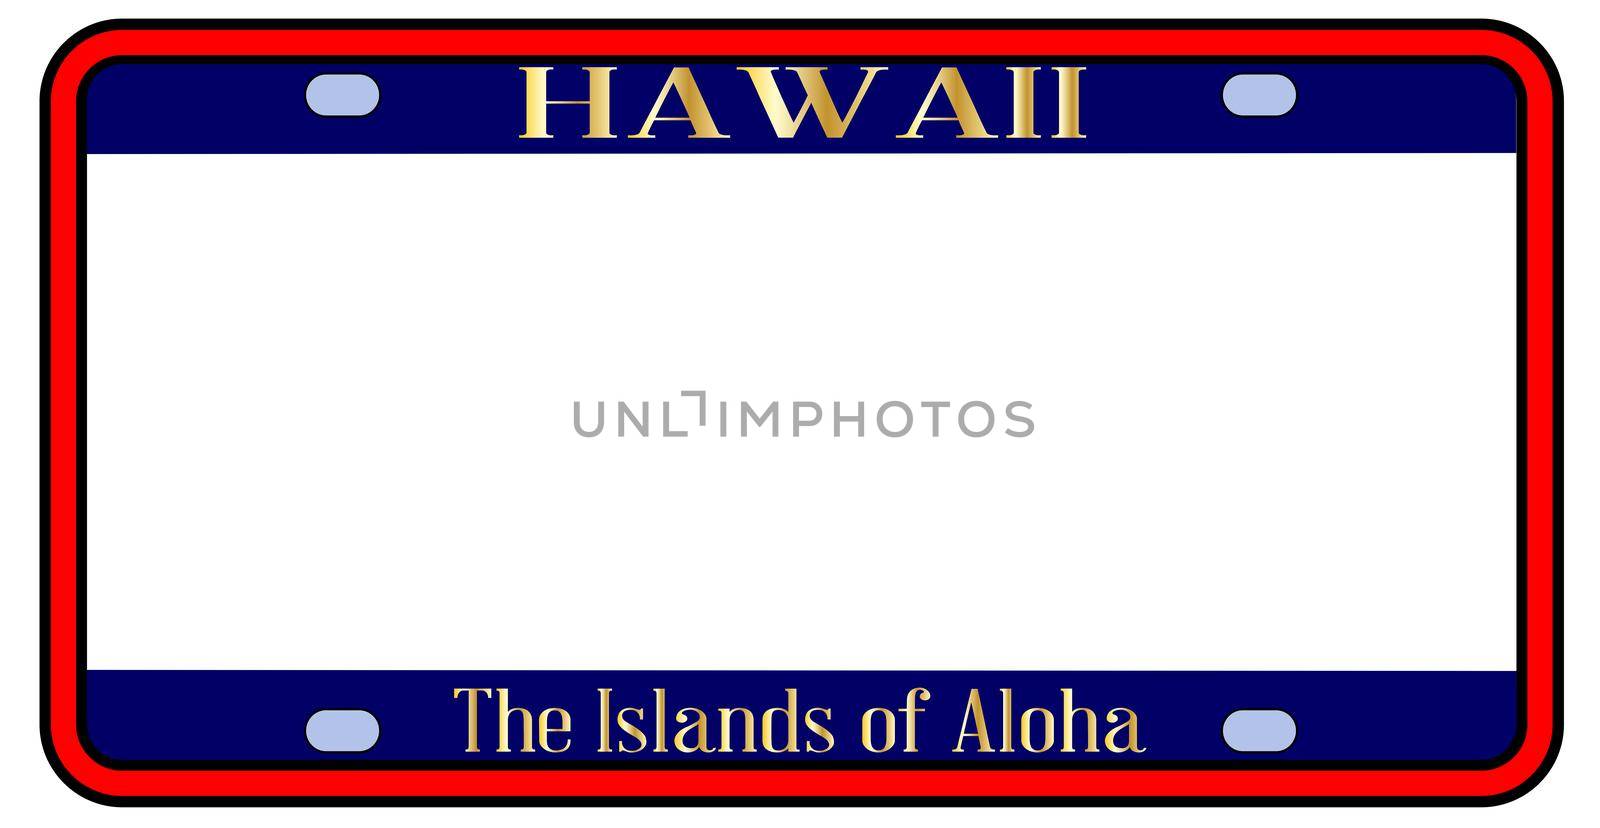 Blank Hawaii state license plate in the colors of the state flag over a white background